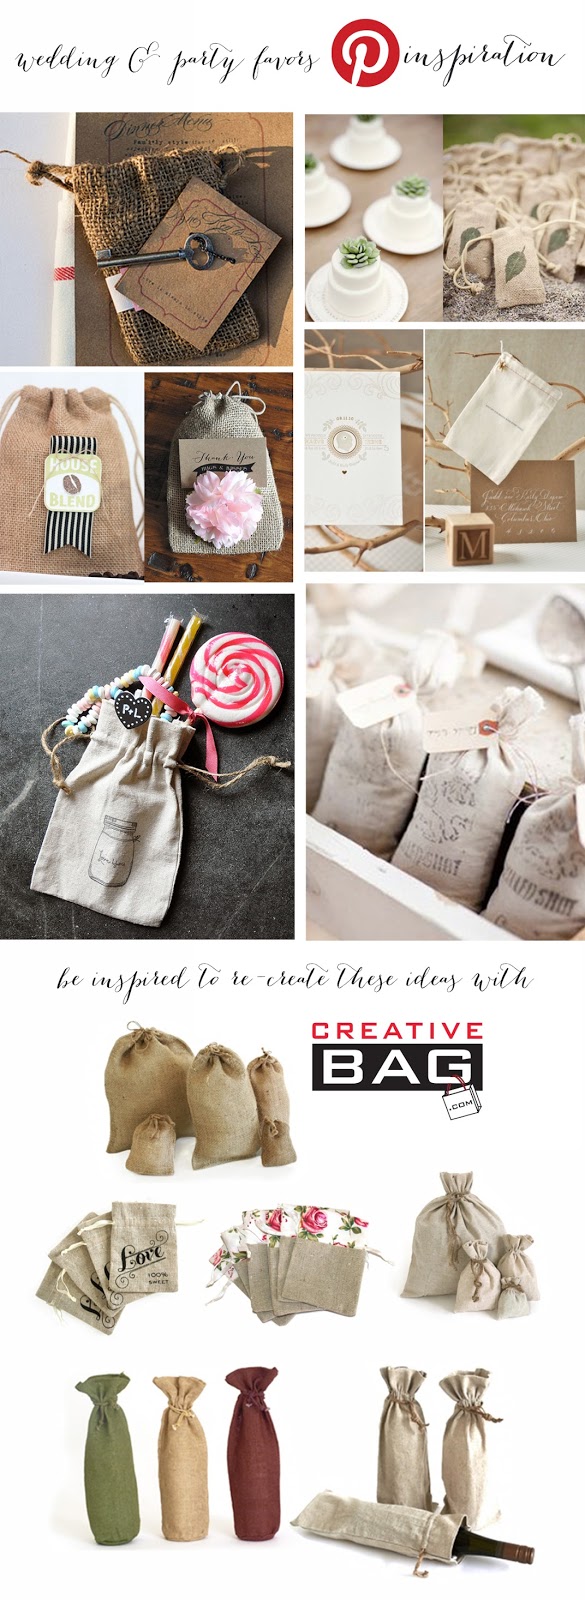 wedding and party favor inspiration using burlap and line  from Creative Bag